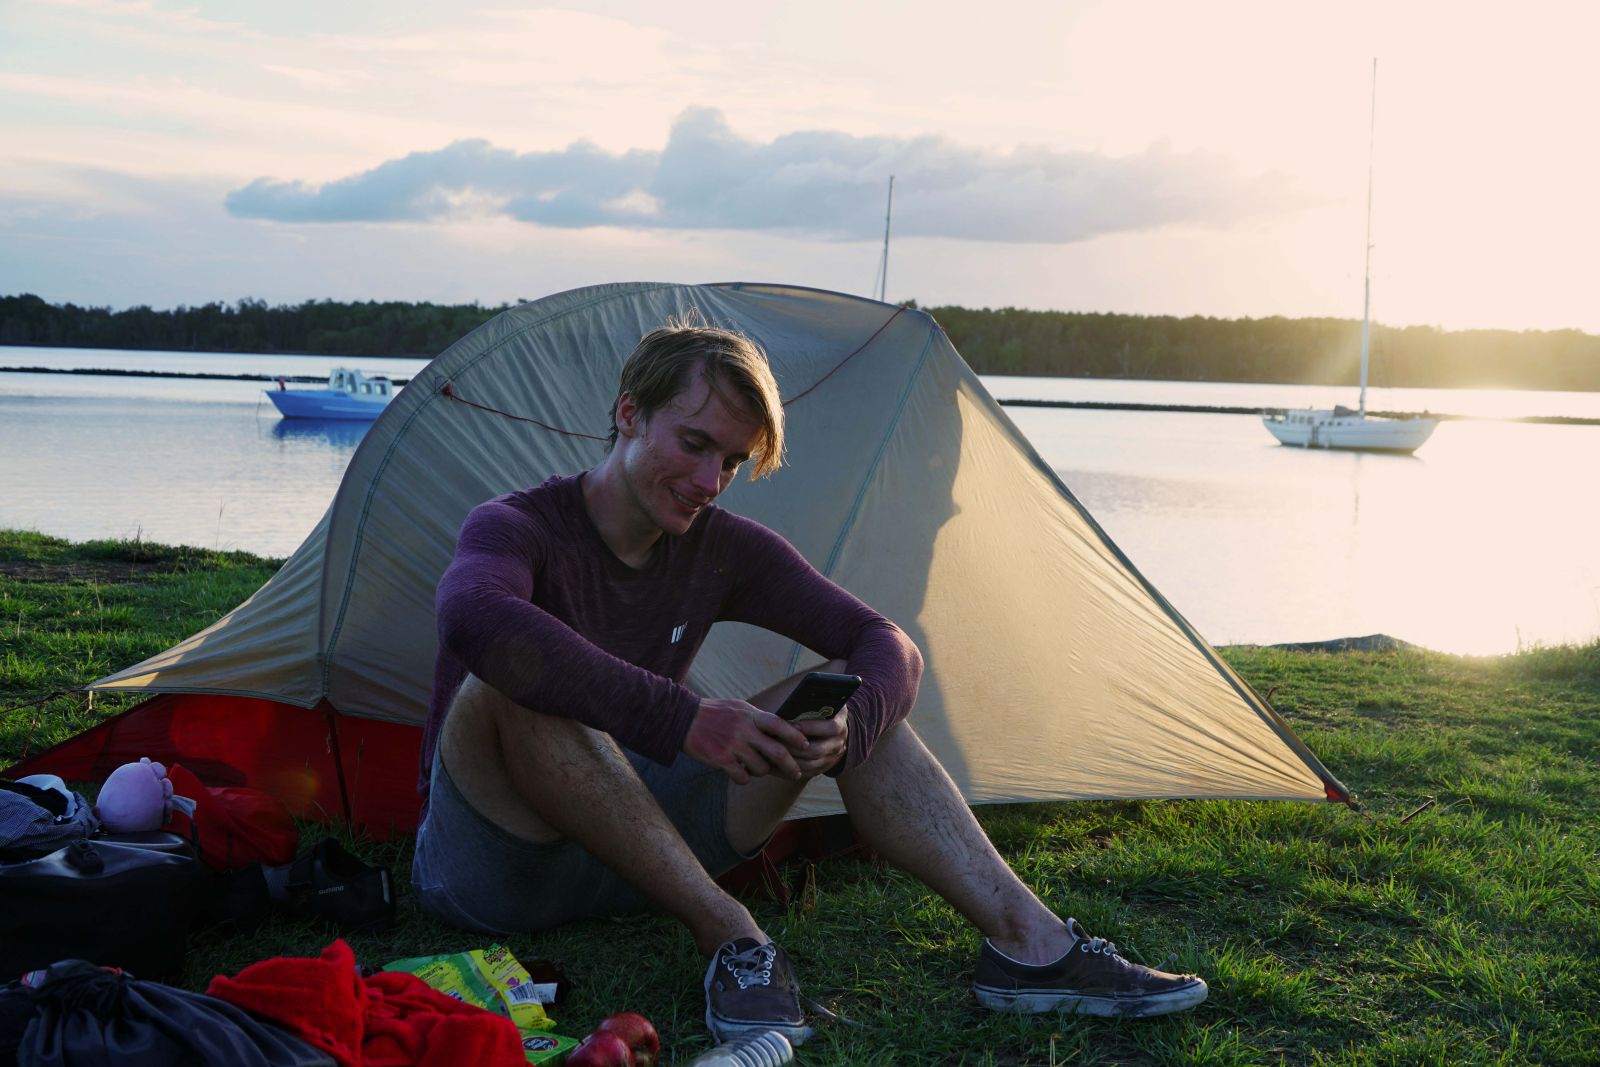 James sitting in front of their tent with the sun setting in the background over the coean